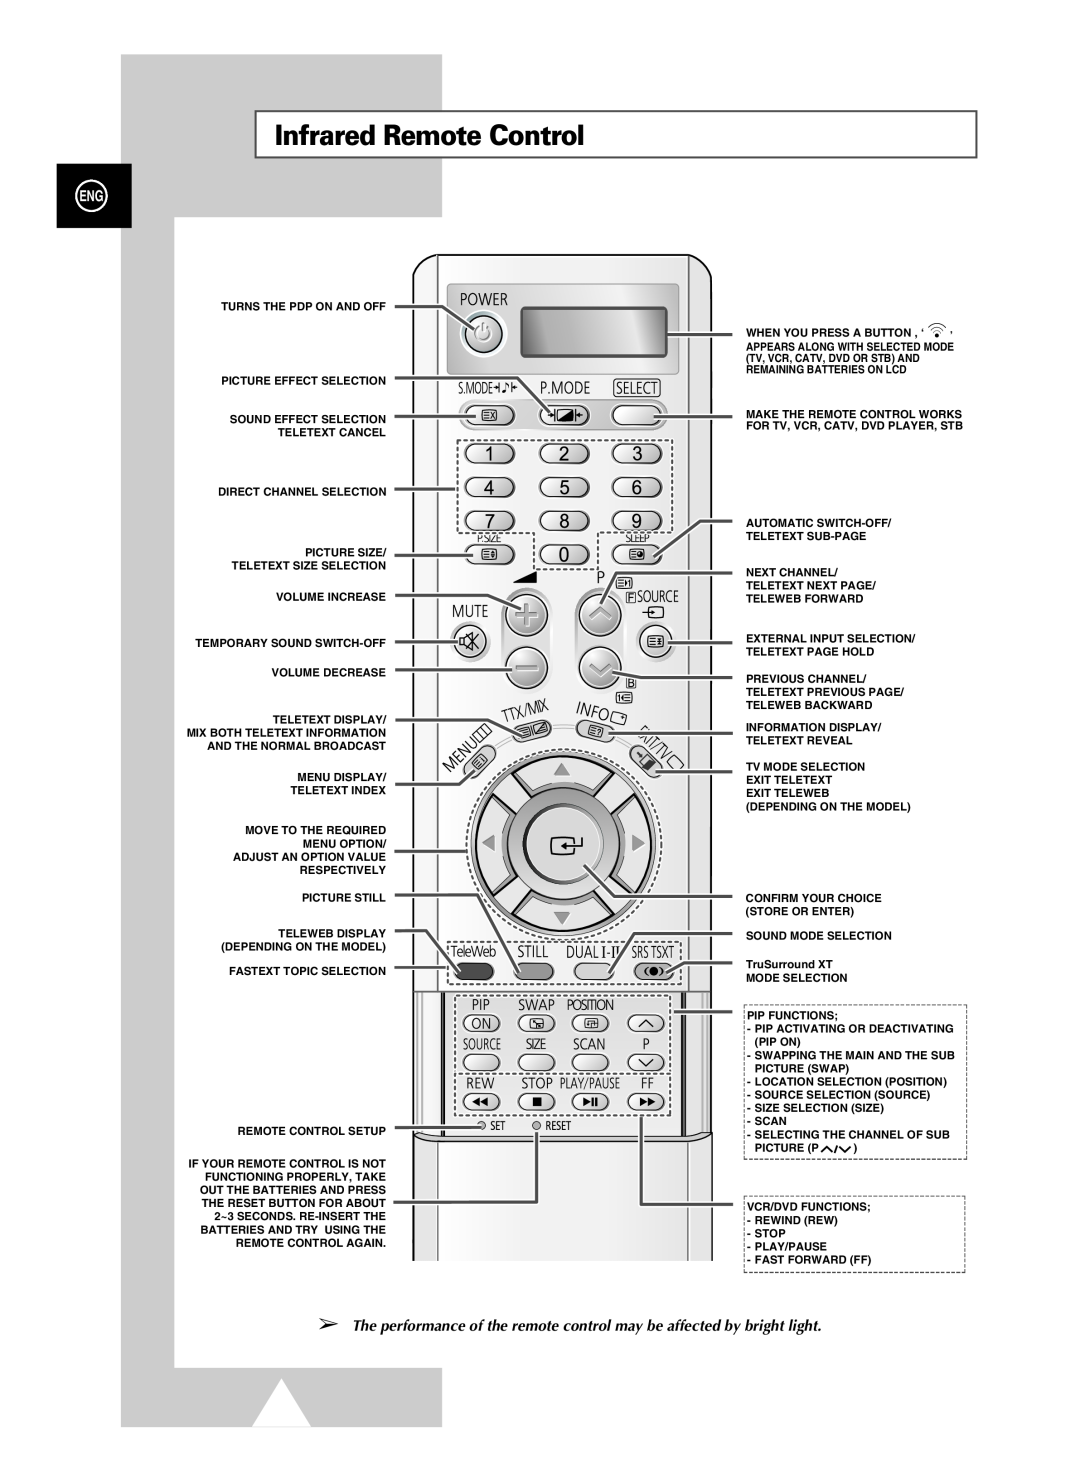 Samsung PS-37S4A1 manual Infrared Remote Control, The performance of the remote control may be affected by bright light 